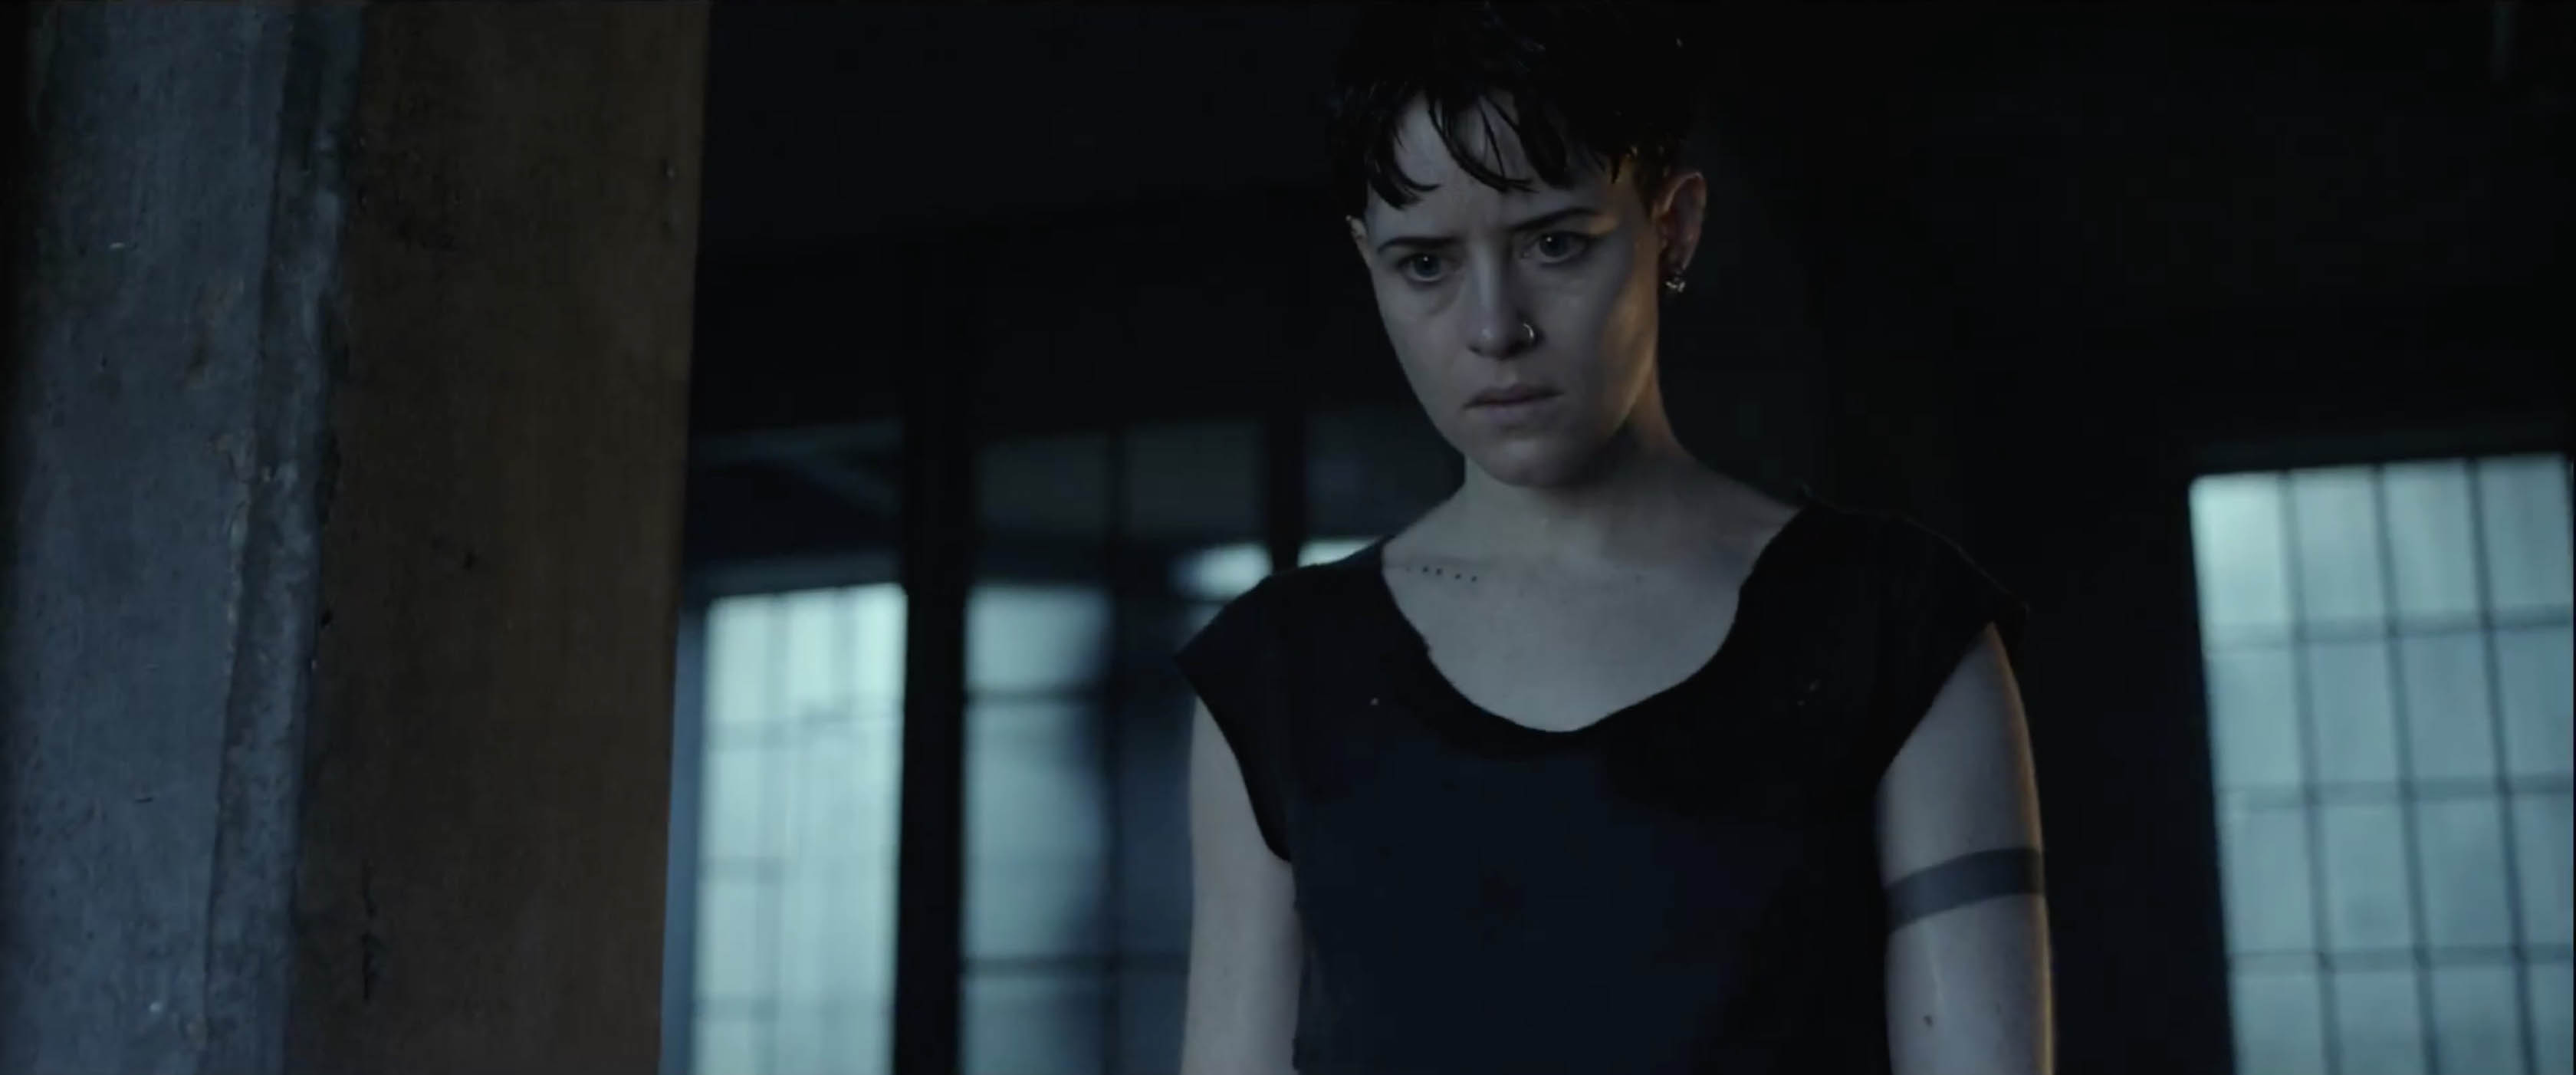 The Girl in the Spider's Web Trailer Sets Up the Villain ...